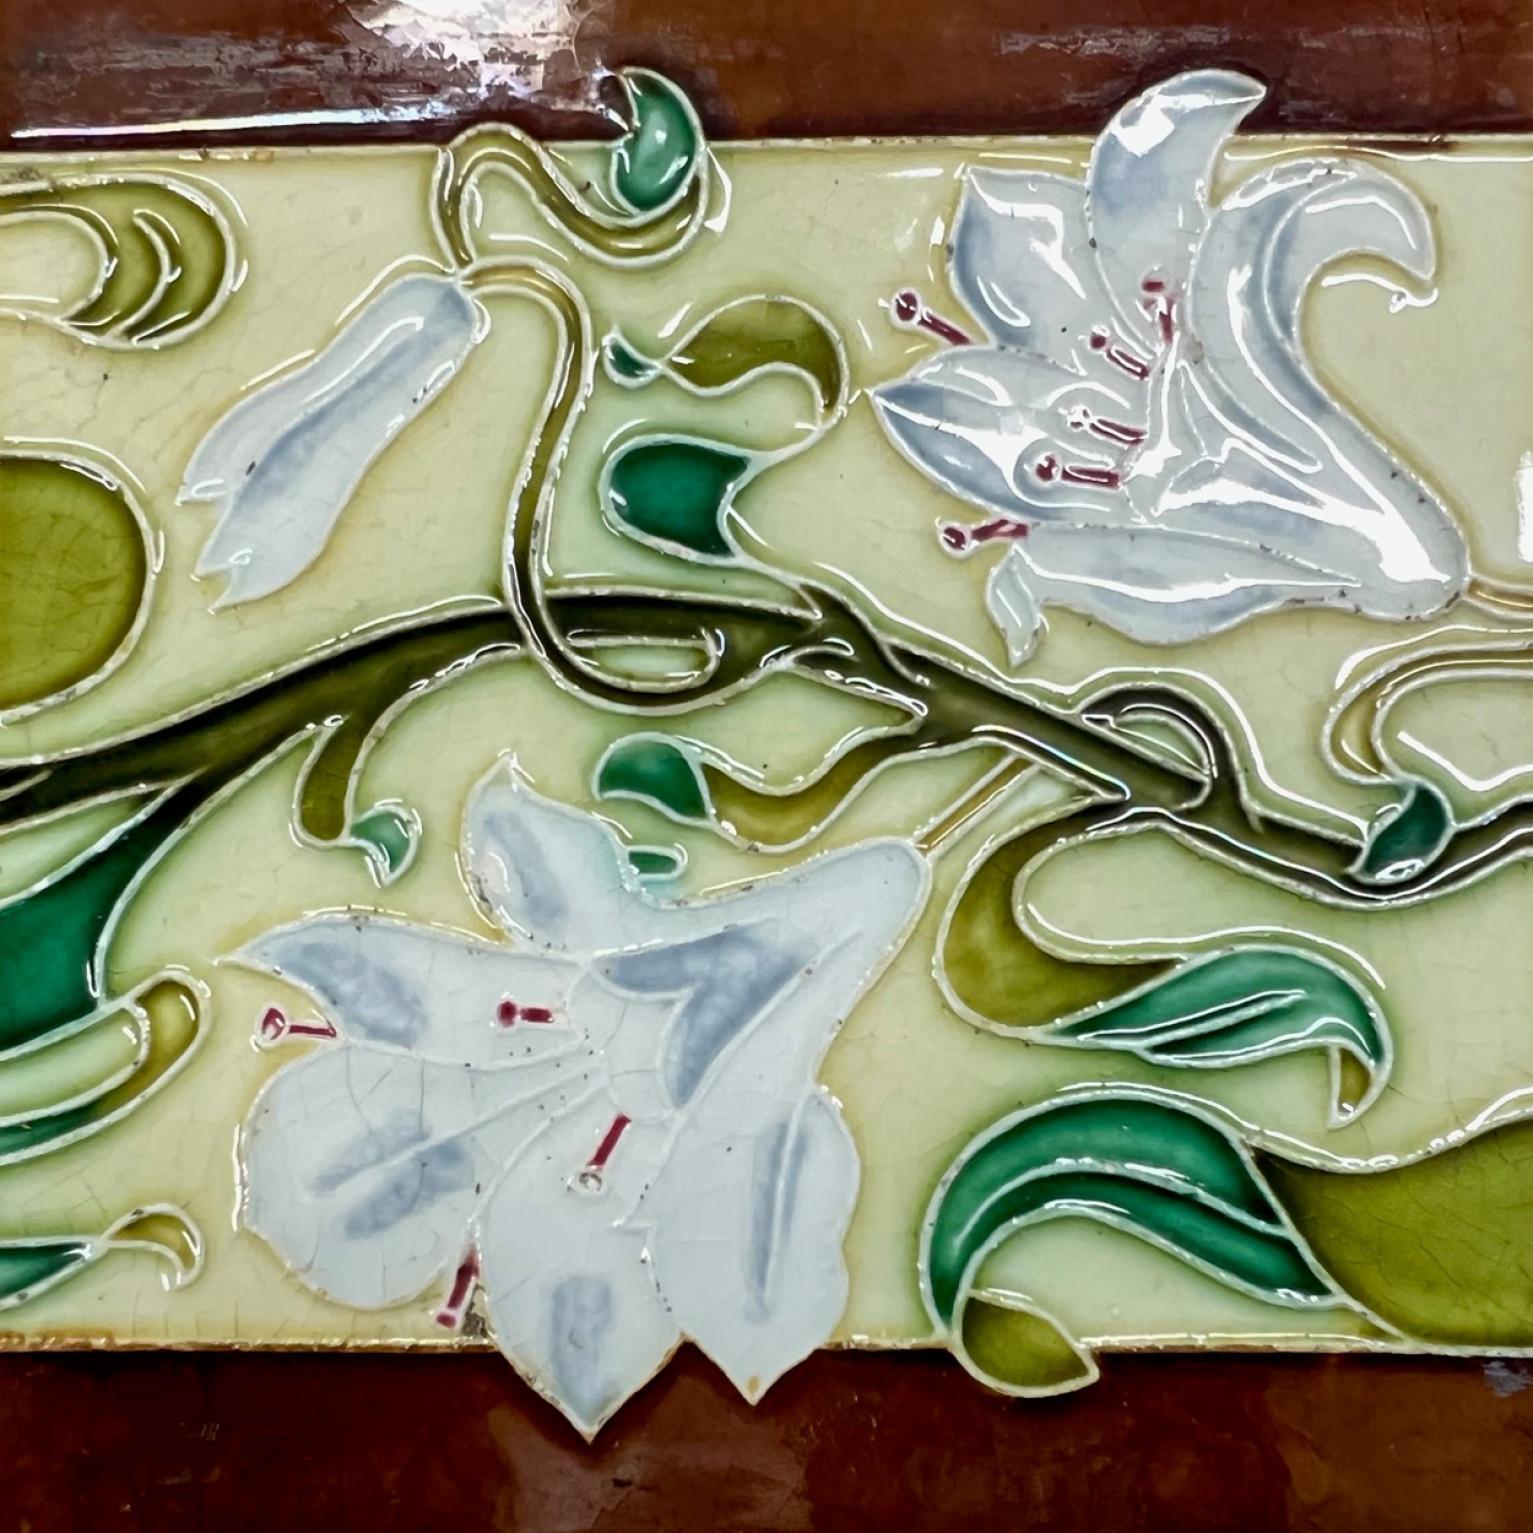 1 of the 36 amazing and unique handmade ceramic tiles. Manufactured by Societe Morialme, circa 1920s. Stylized design in wonderful colors brown, yellow, green. These tiles would be charming displayed on easels, framed or incorporated into a custom